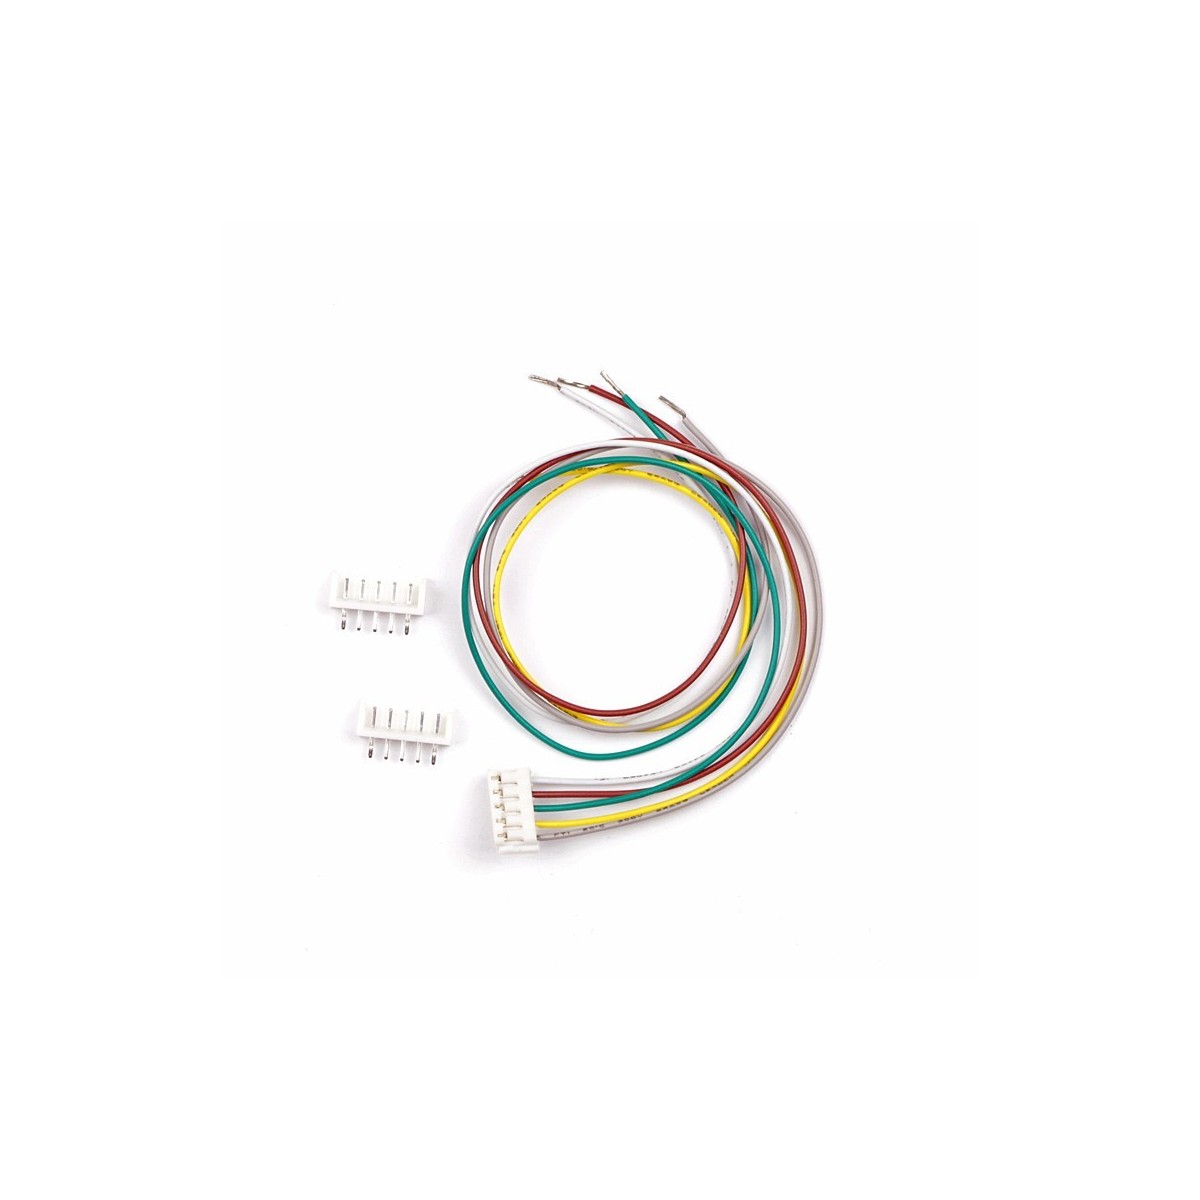 I2C bus connector cable 5pol